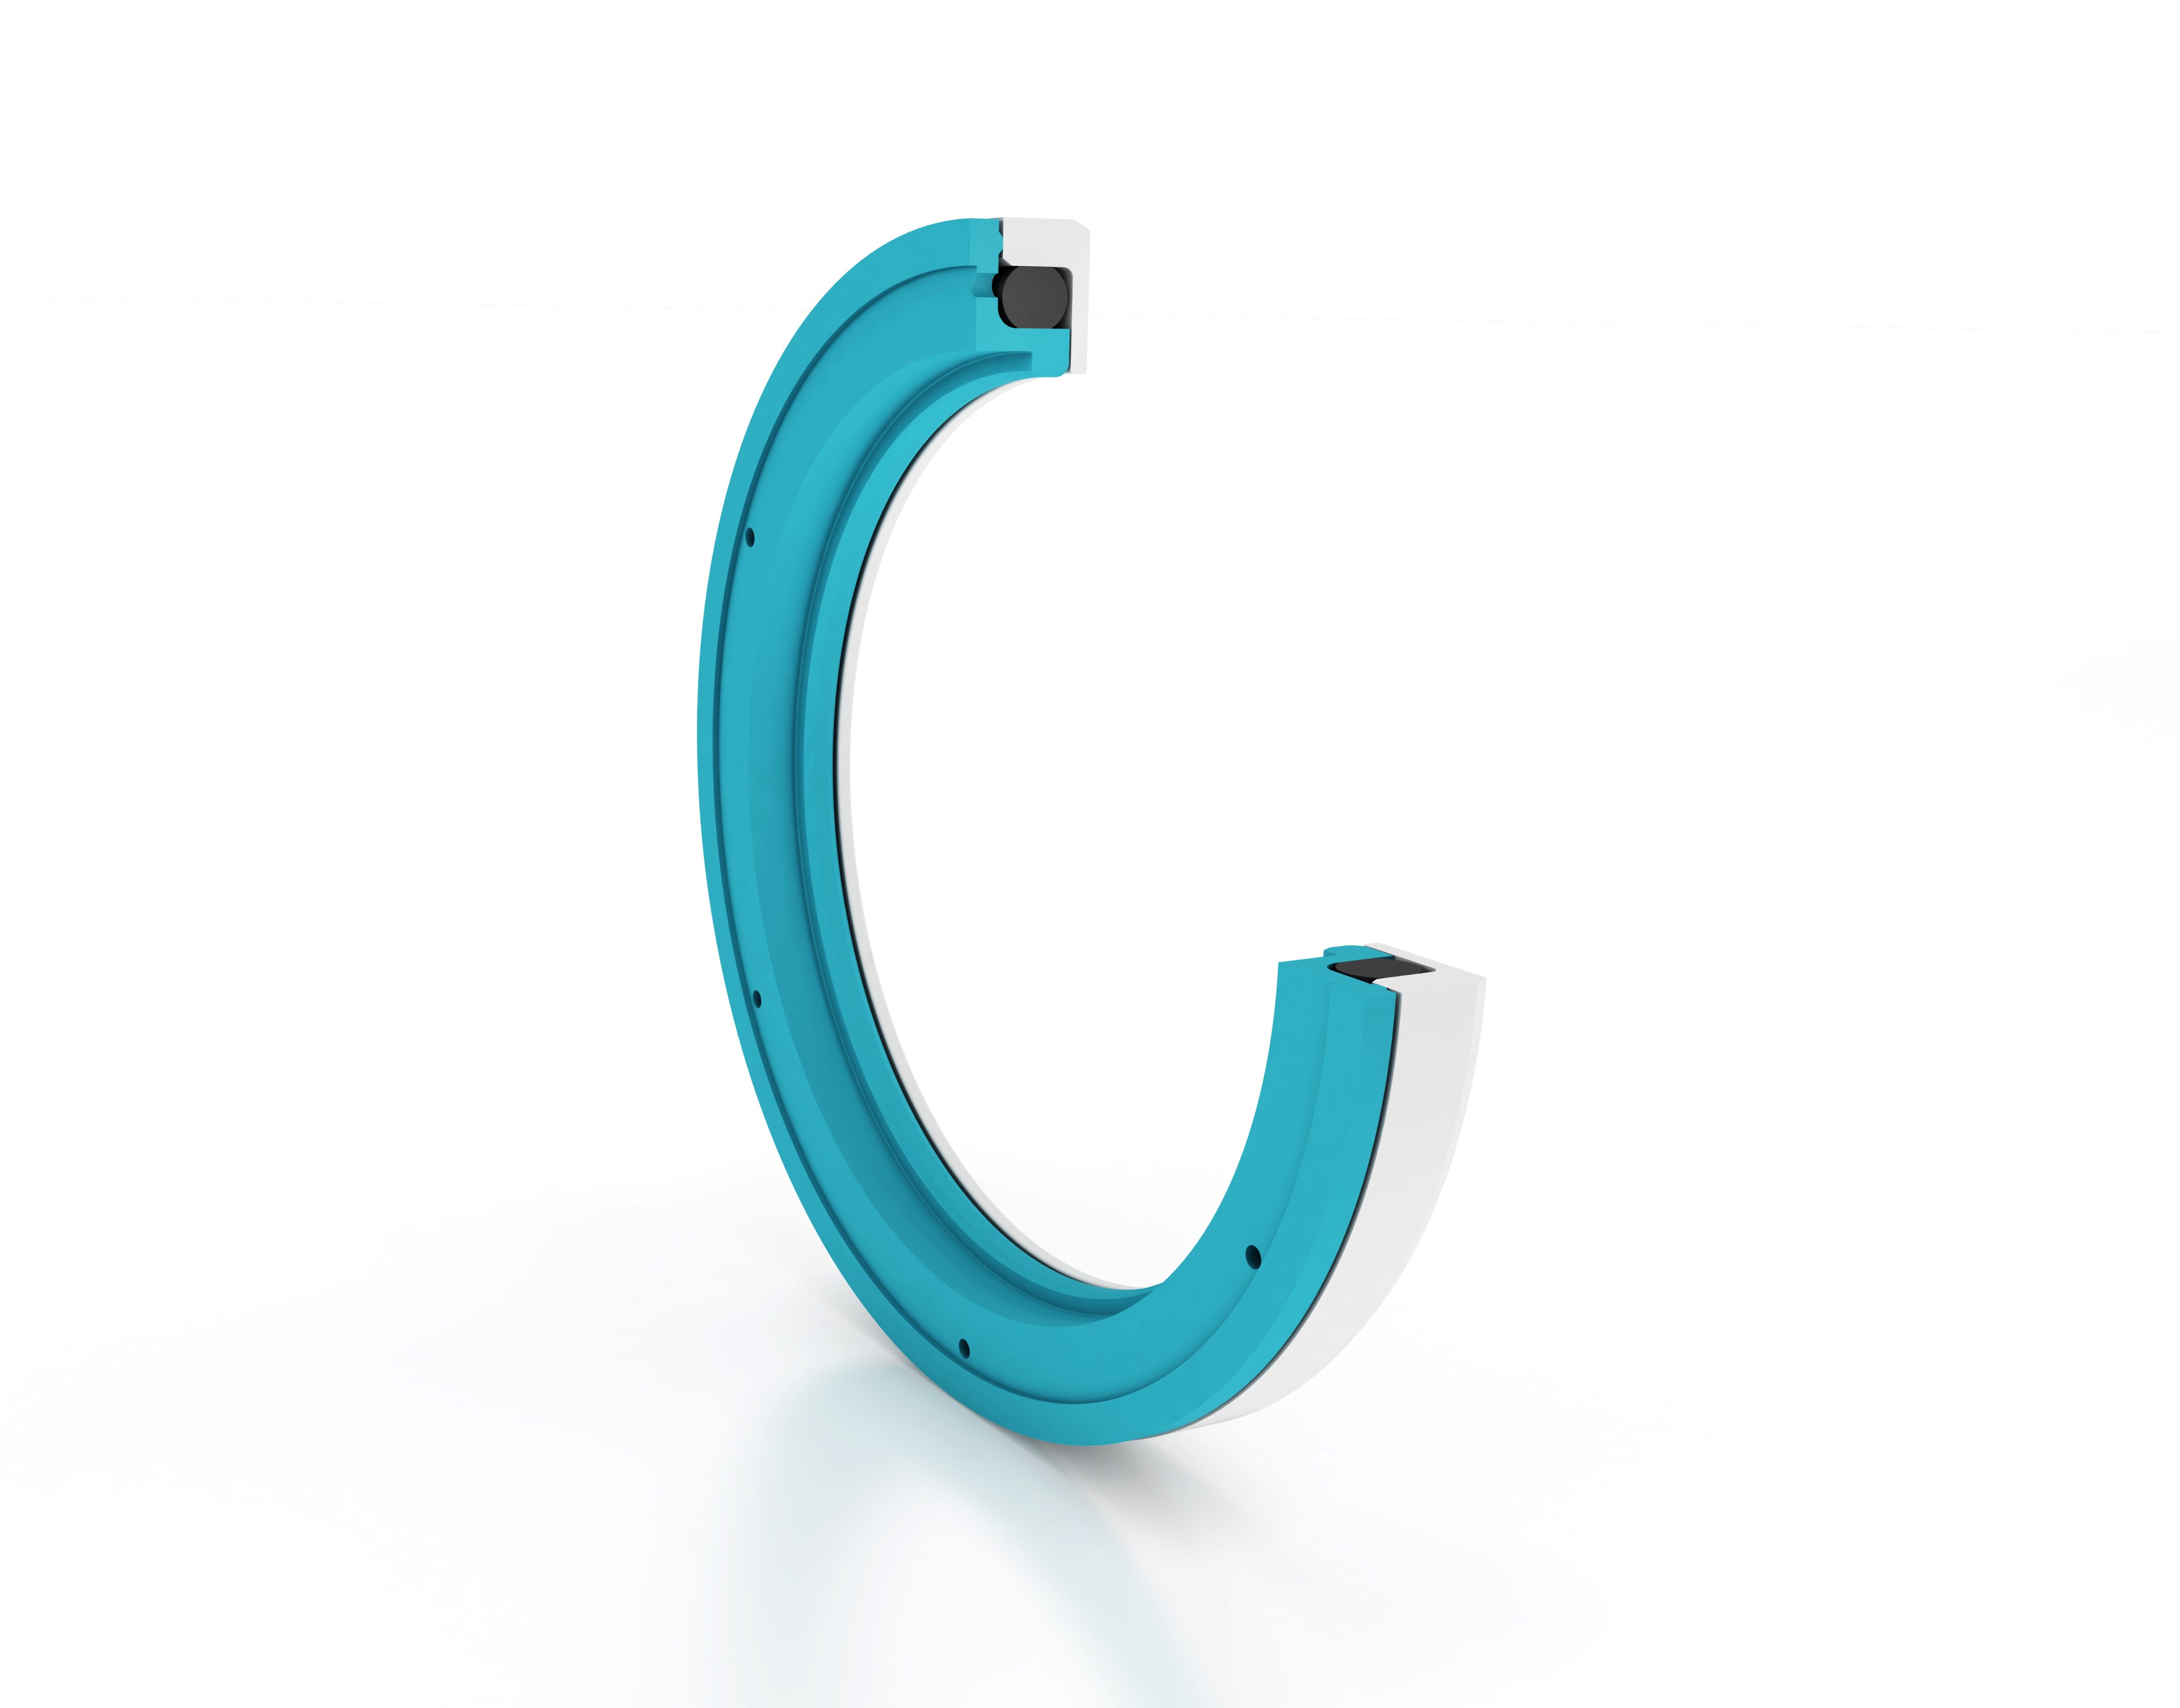 Turcon Roto Glyd Ring DXL provides improved dynamic sealing efficiency and reduced friction